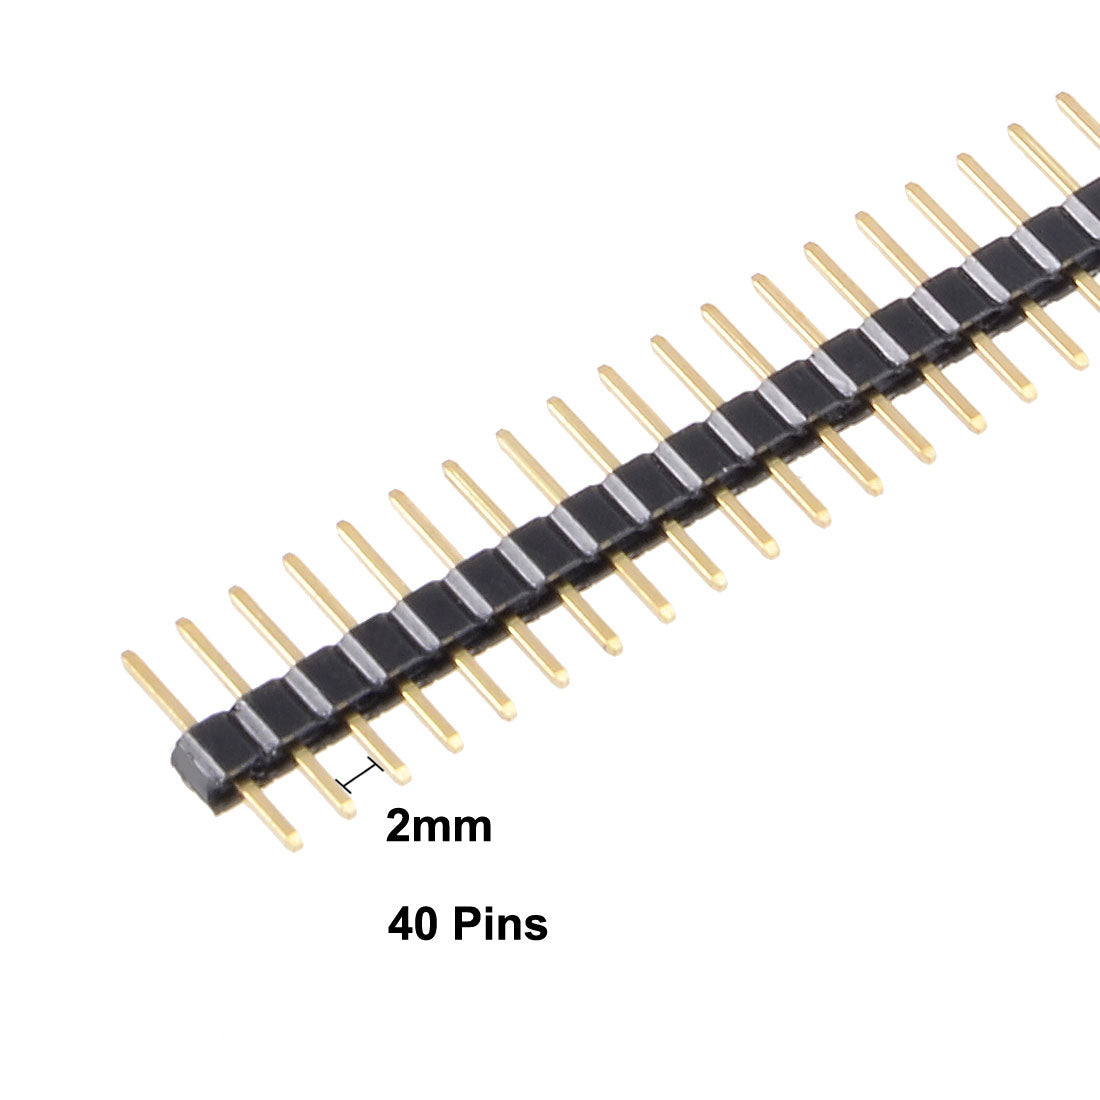 uxcell Uxcell 20Pcs 2mm Pitch 40P Single Row Straight Connector Pin Header Strip for Arduino Prototype Shield